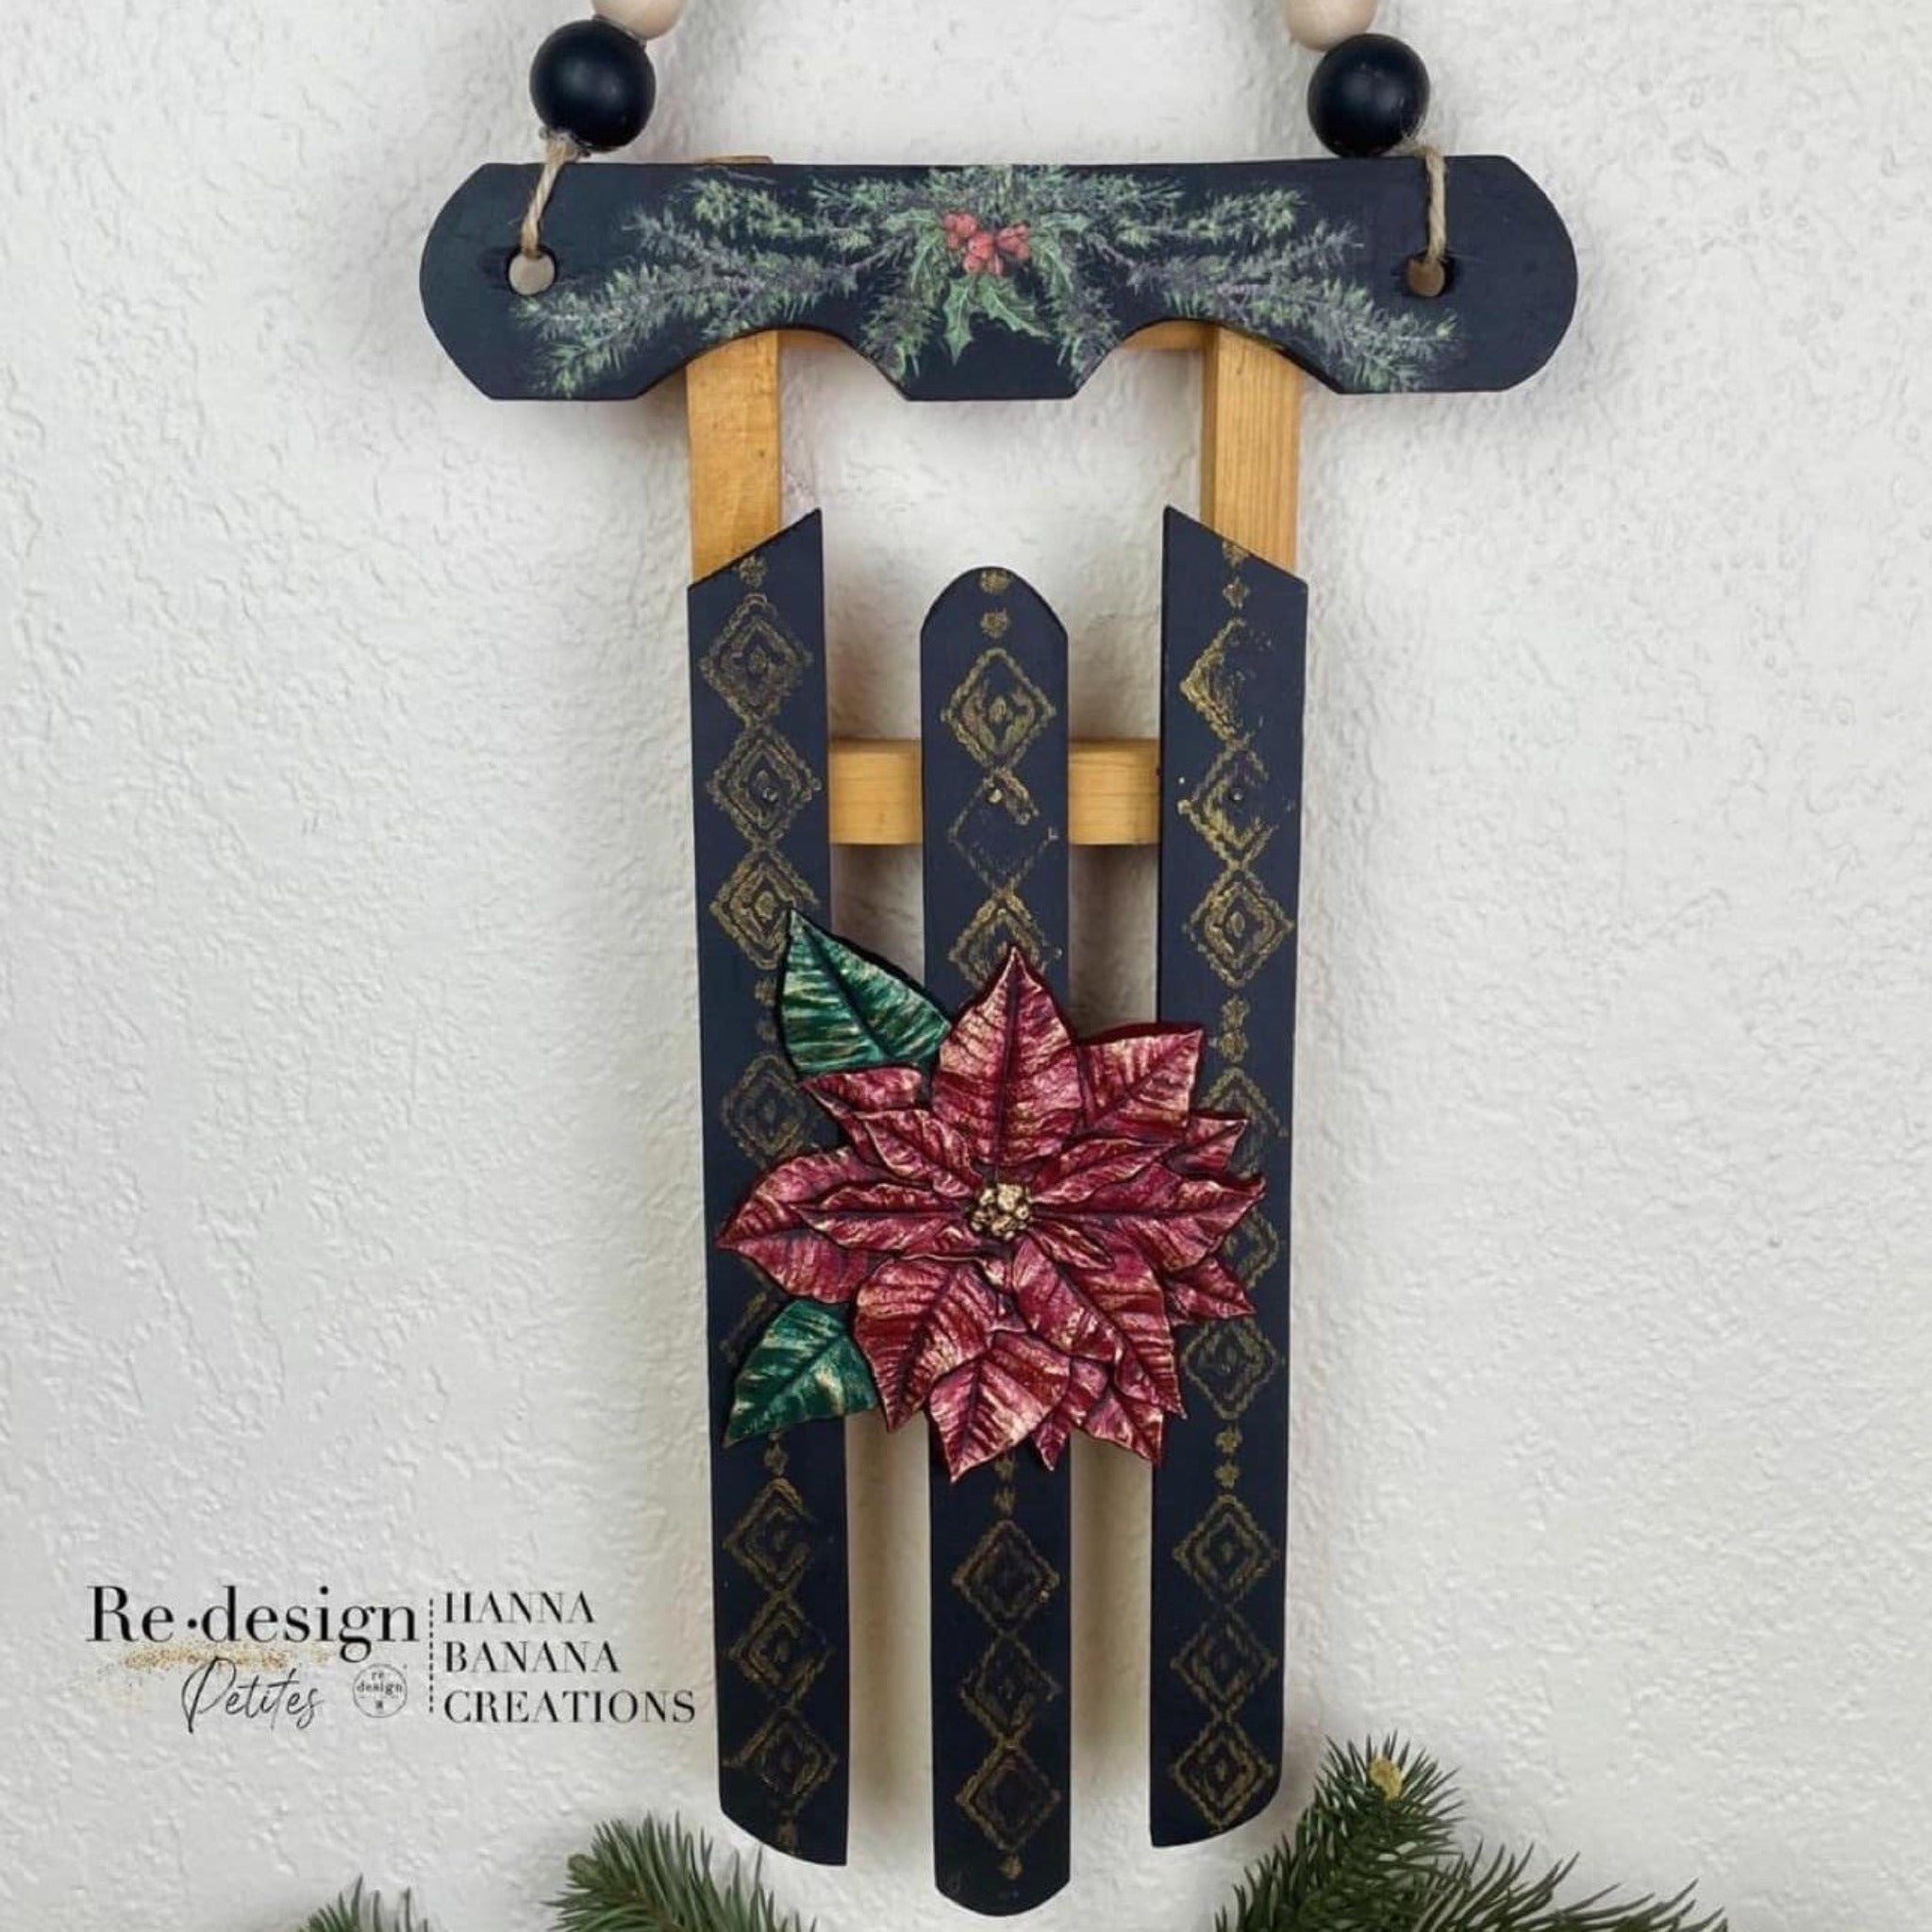 A sleigh decoration refurbished by Hanna Banana Creations is painted navy blue with natural wood and features ReDesign with Prima's Perfect Poinsettia silicone mould casting in metallic red and metallic green on the center of the seat.